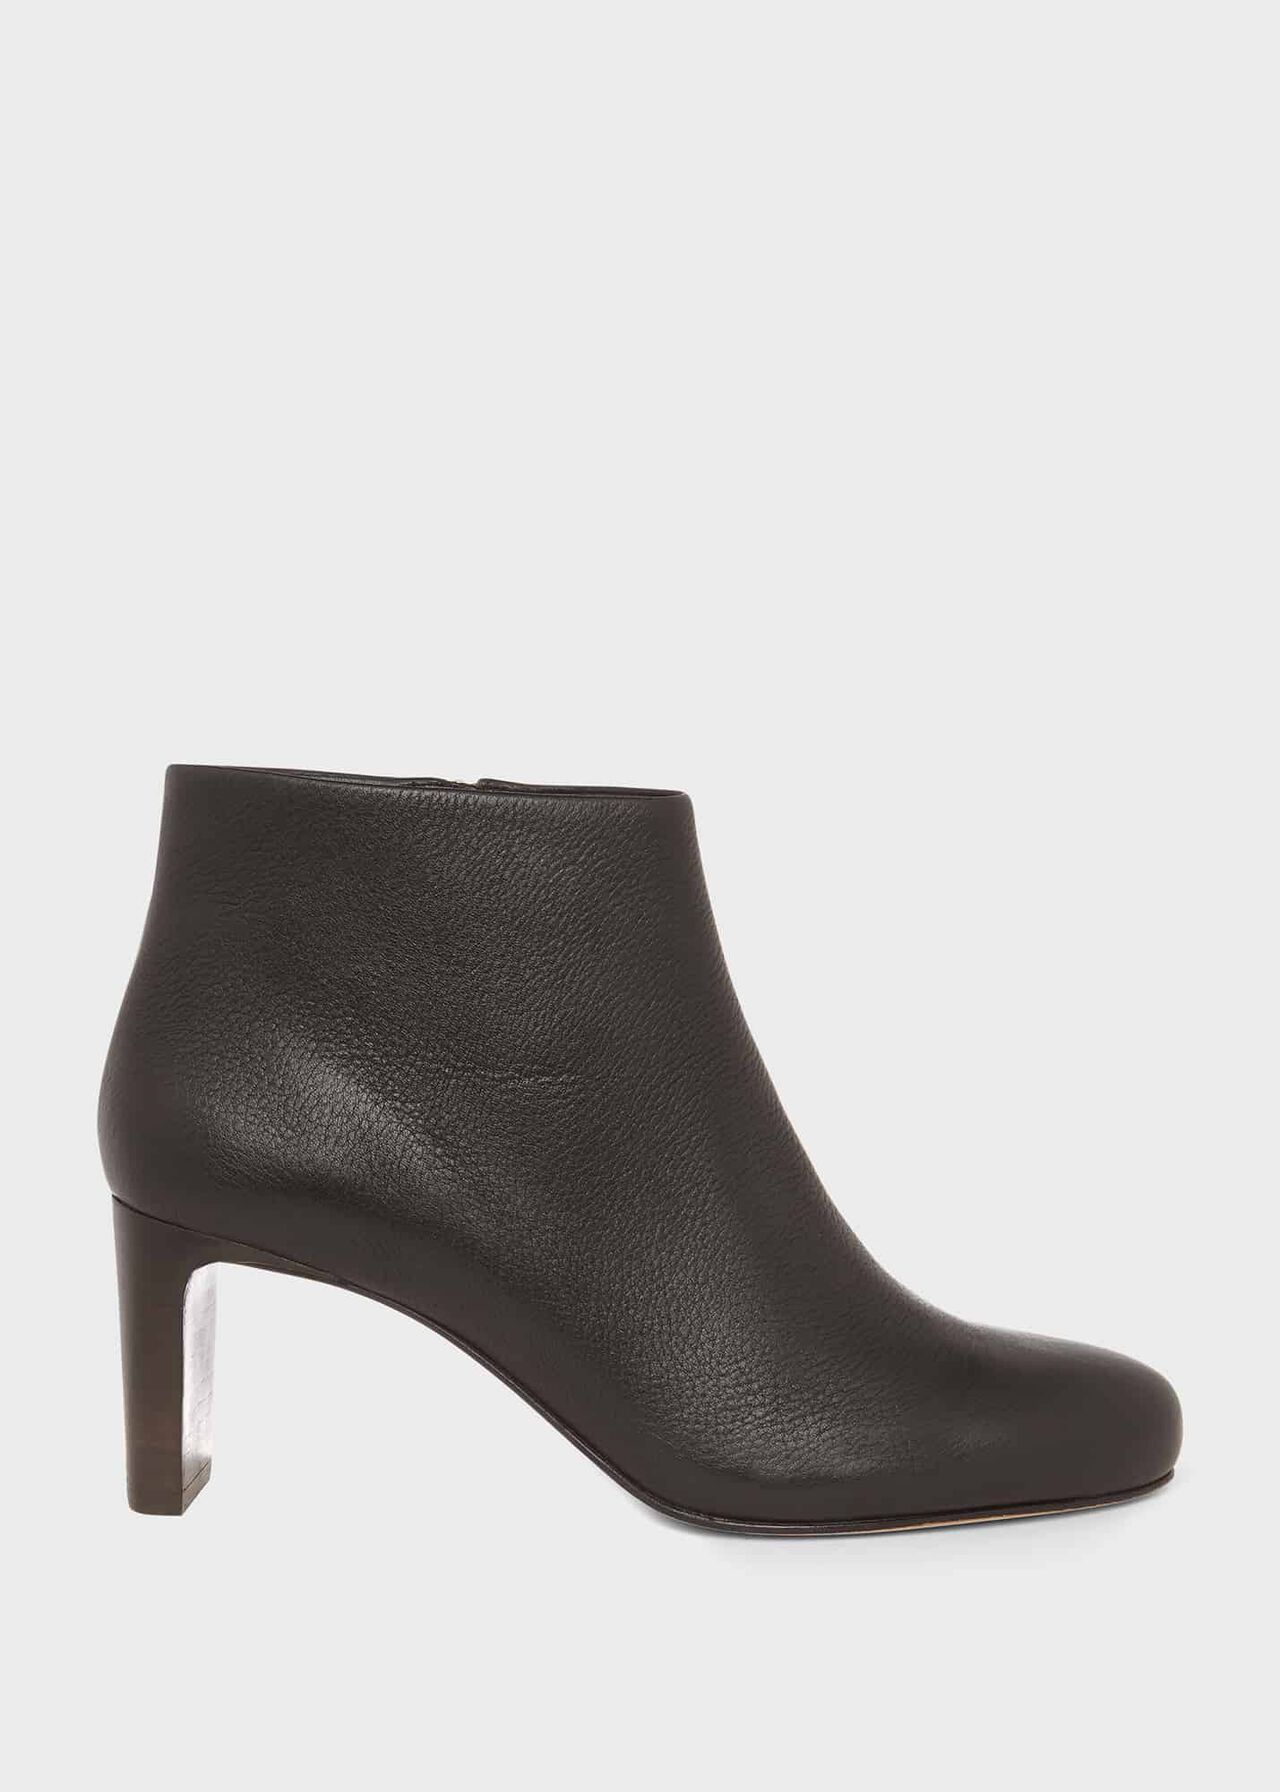 Lizzie Leather Ankle Boots, Black, hi-res